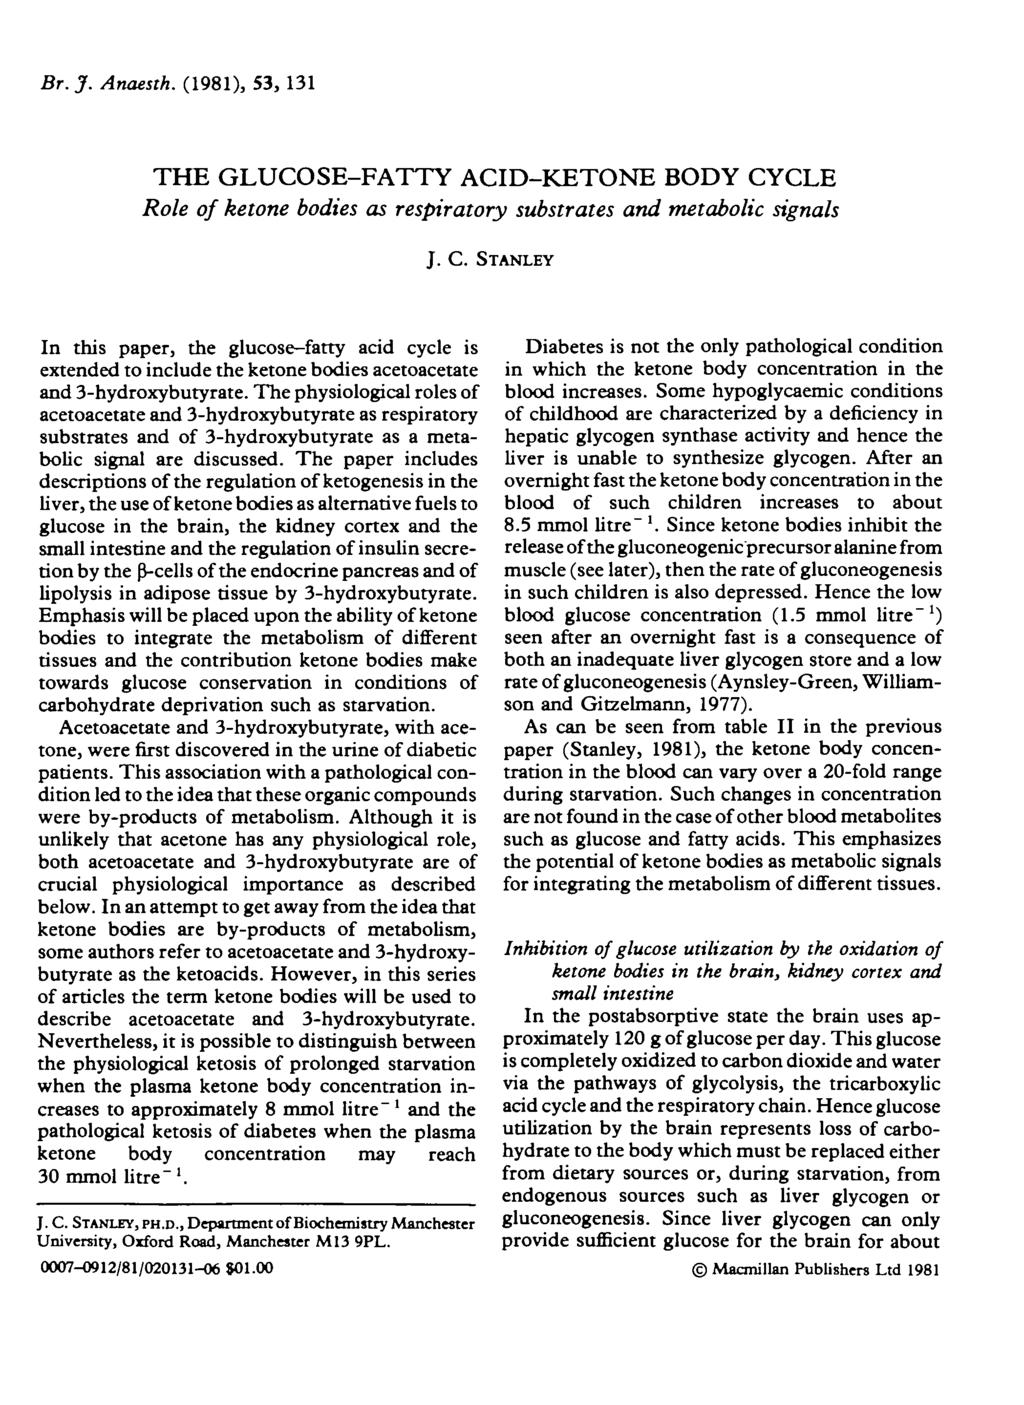 Br. J. Anaesth. (1981), 53, 131 THE GLUCOSE-FATTY ACID-KETONE BODY CYCLE Role of ketone bodies as respiratory substrates and metabolic signals J. C. STANLEY In this paper, the glucose-fatty acid cycle is extended to include the ketone bodies acetoacetate and 3-hydroxybutyrate.